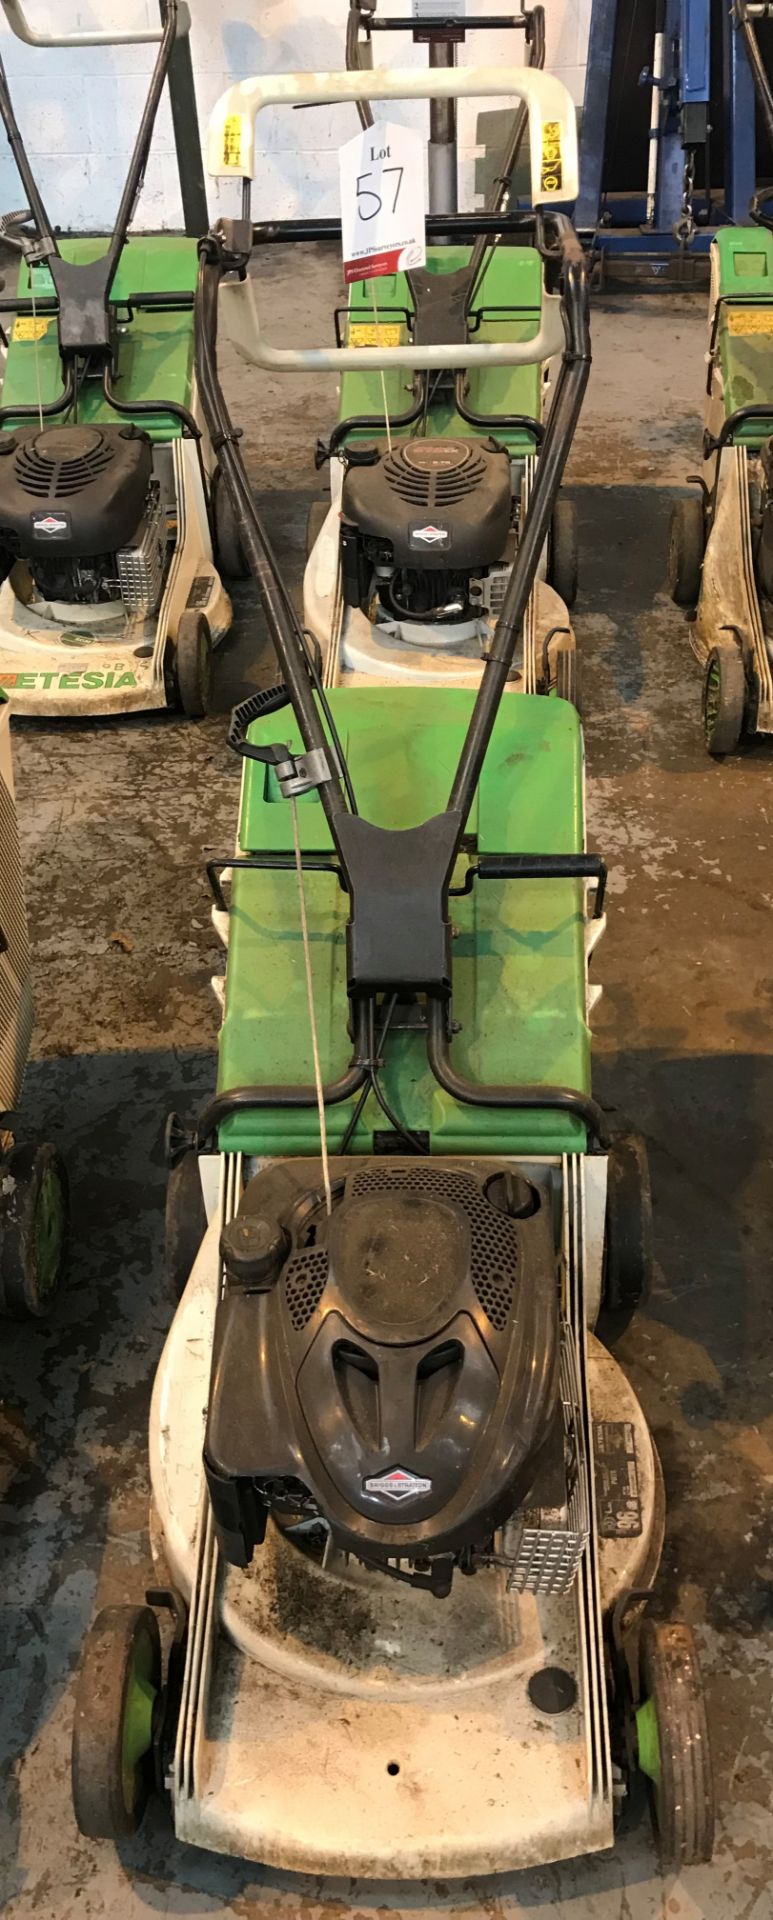 Etesia PBTS Self Propelled Commercial Lawn Mower | 2012